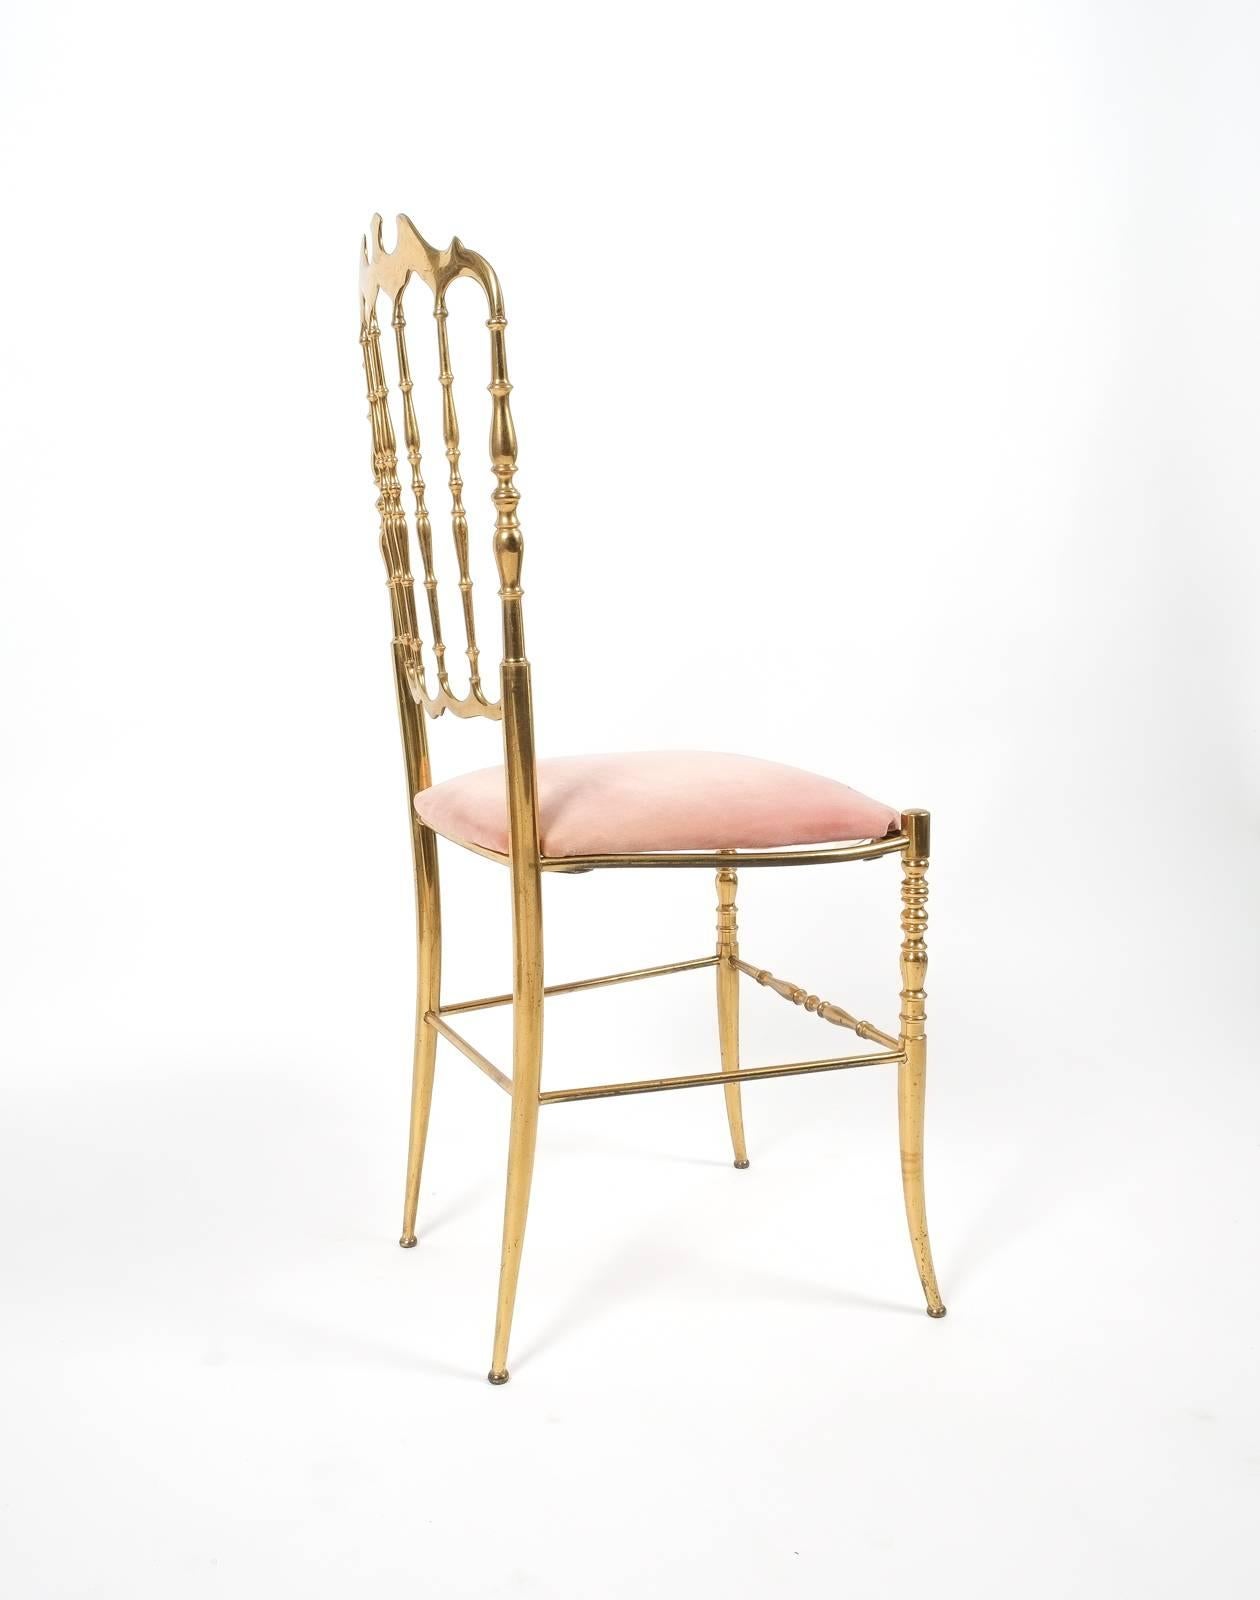 Beautiful solid brass chair by Chiavari, circa 1950. It shows a very nice golden patina and has got a rose velvet upholstery. The condition is very good.